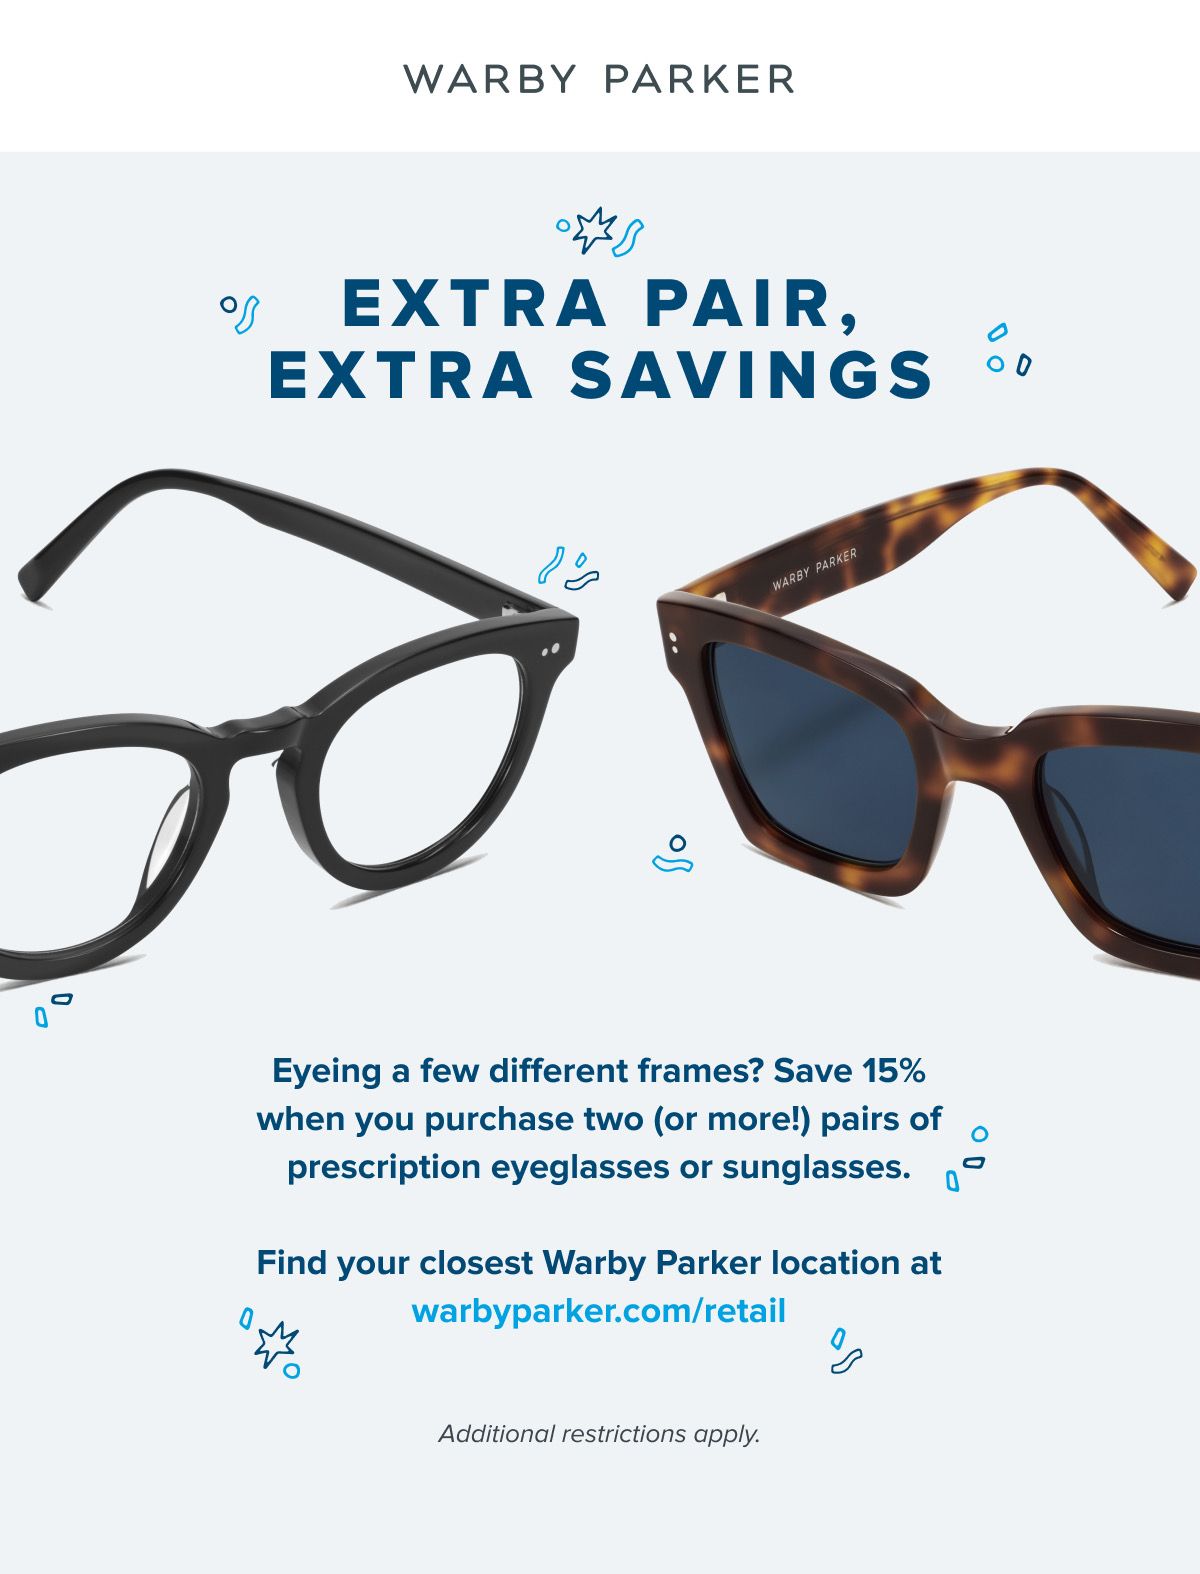 Add a Pair and Save at Warby Parker! from Warby Parker